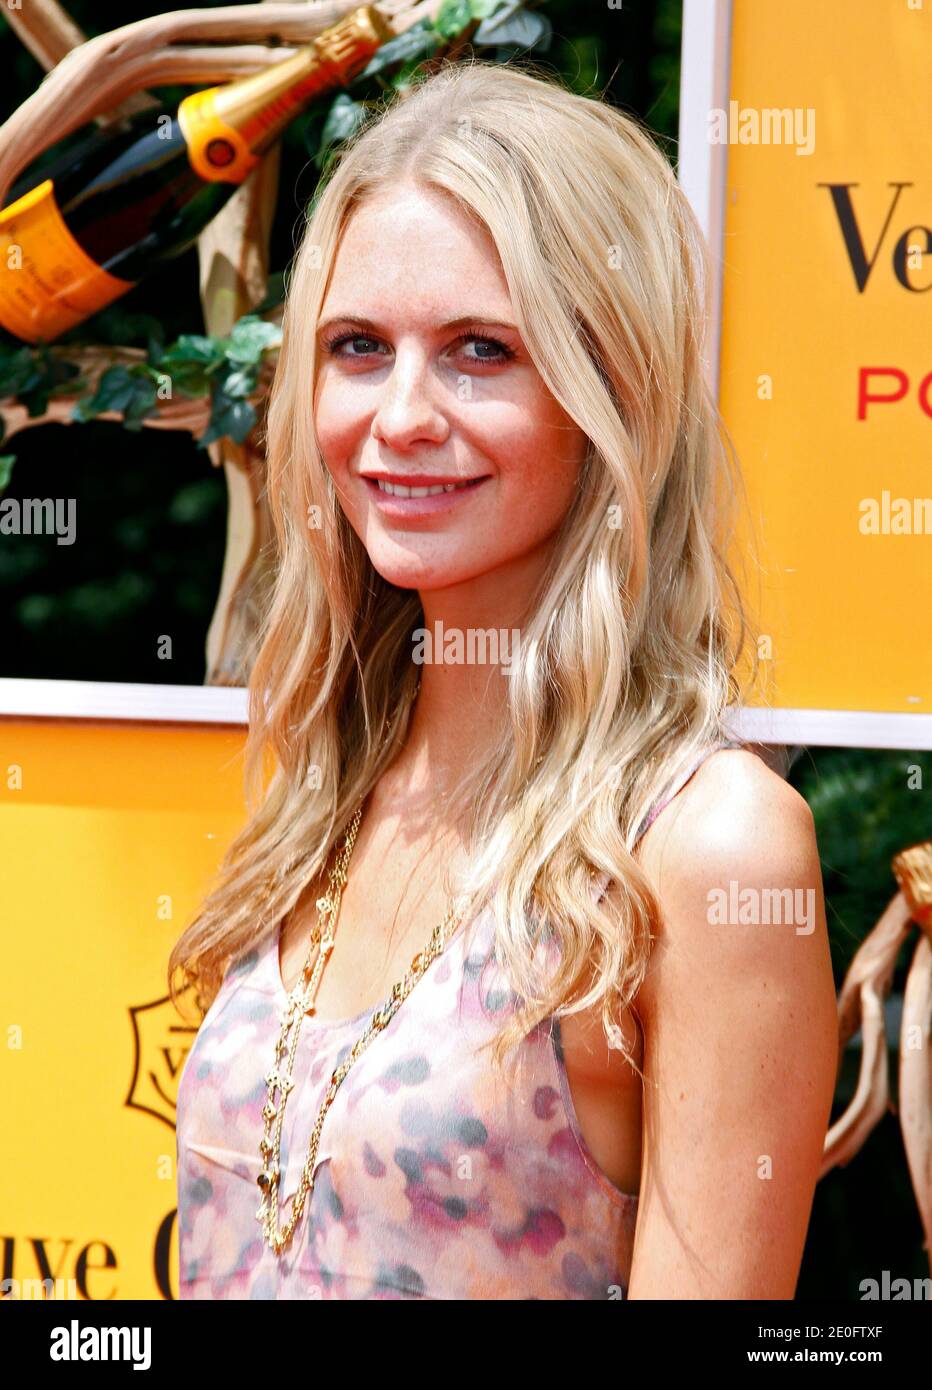 Poppy Delevigne attends the 5th Annual Veuve Clicquot Polo Classic at Liberty State Park, NJ, USA, on June 2, 2012. Photo by Donna Ward/ABACAPRESS.COM Stock Photo